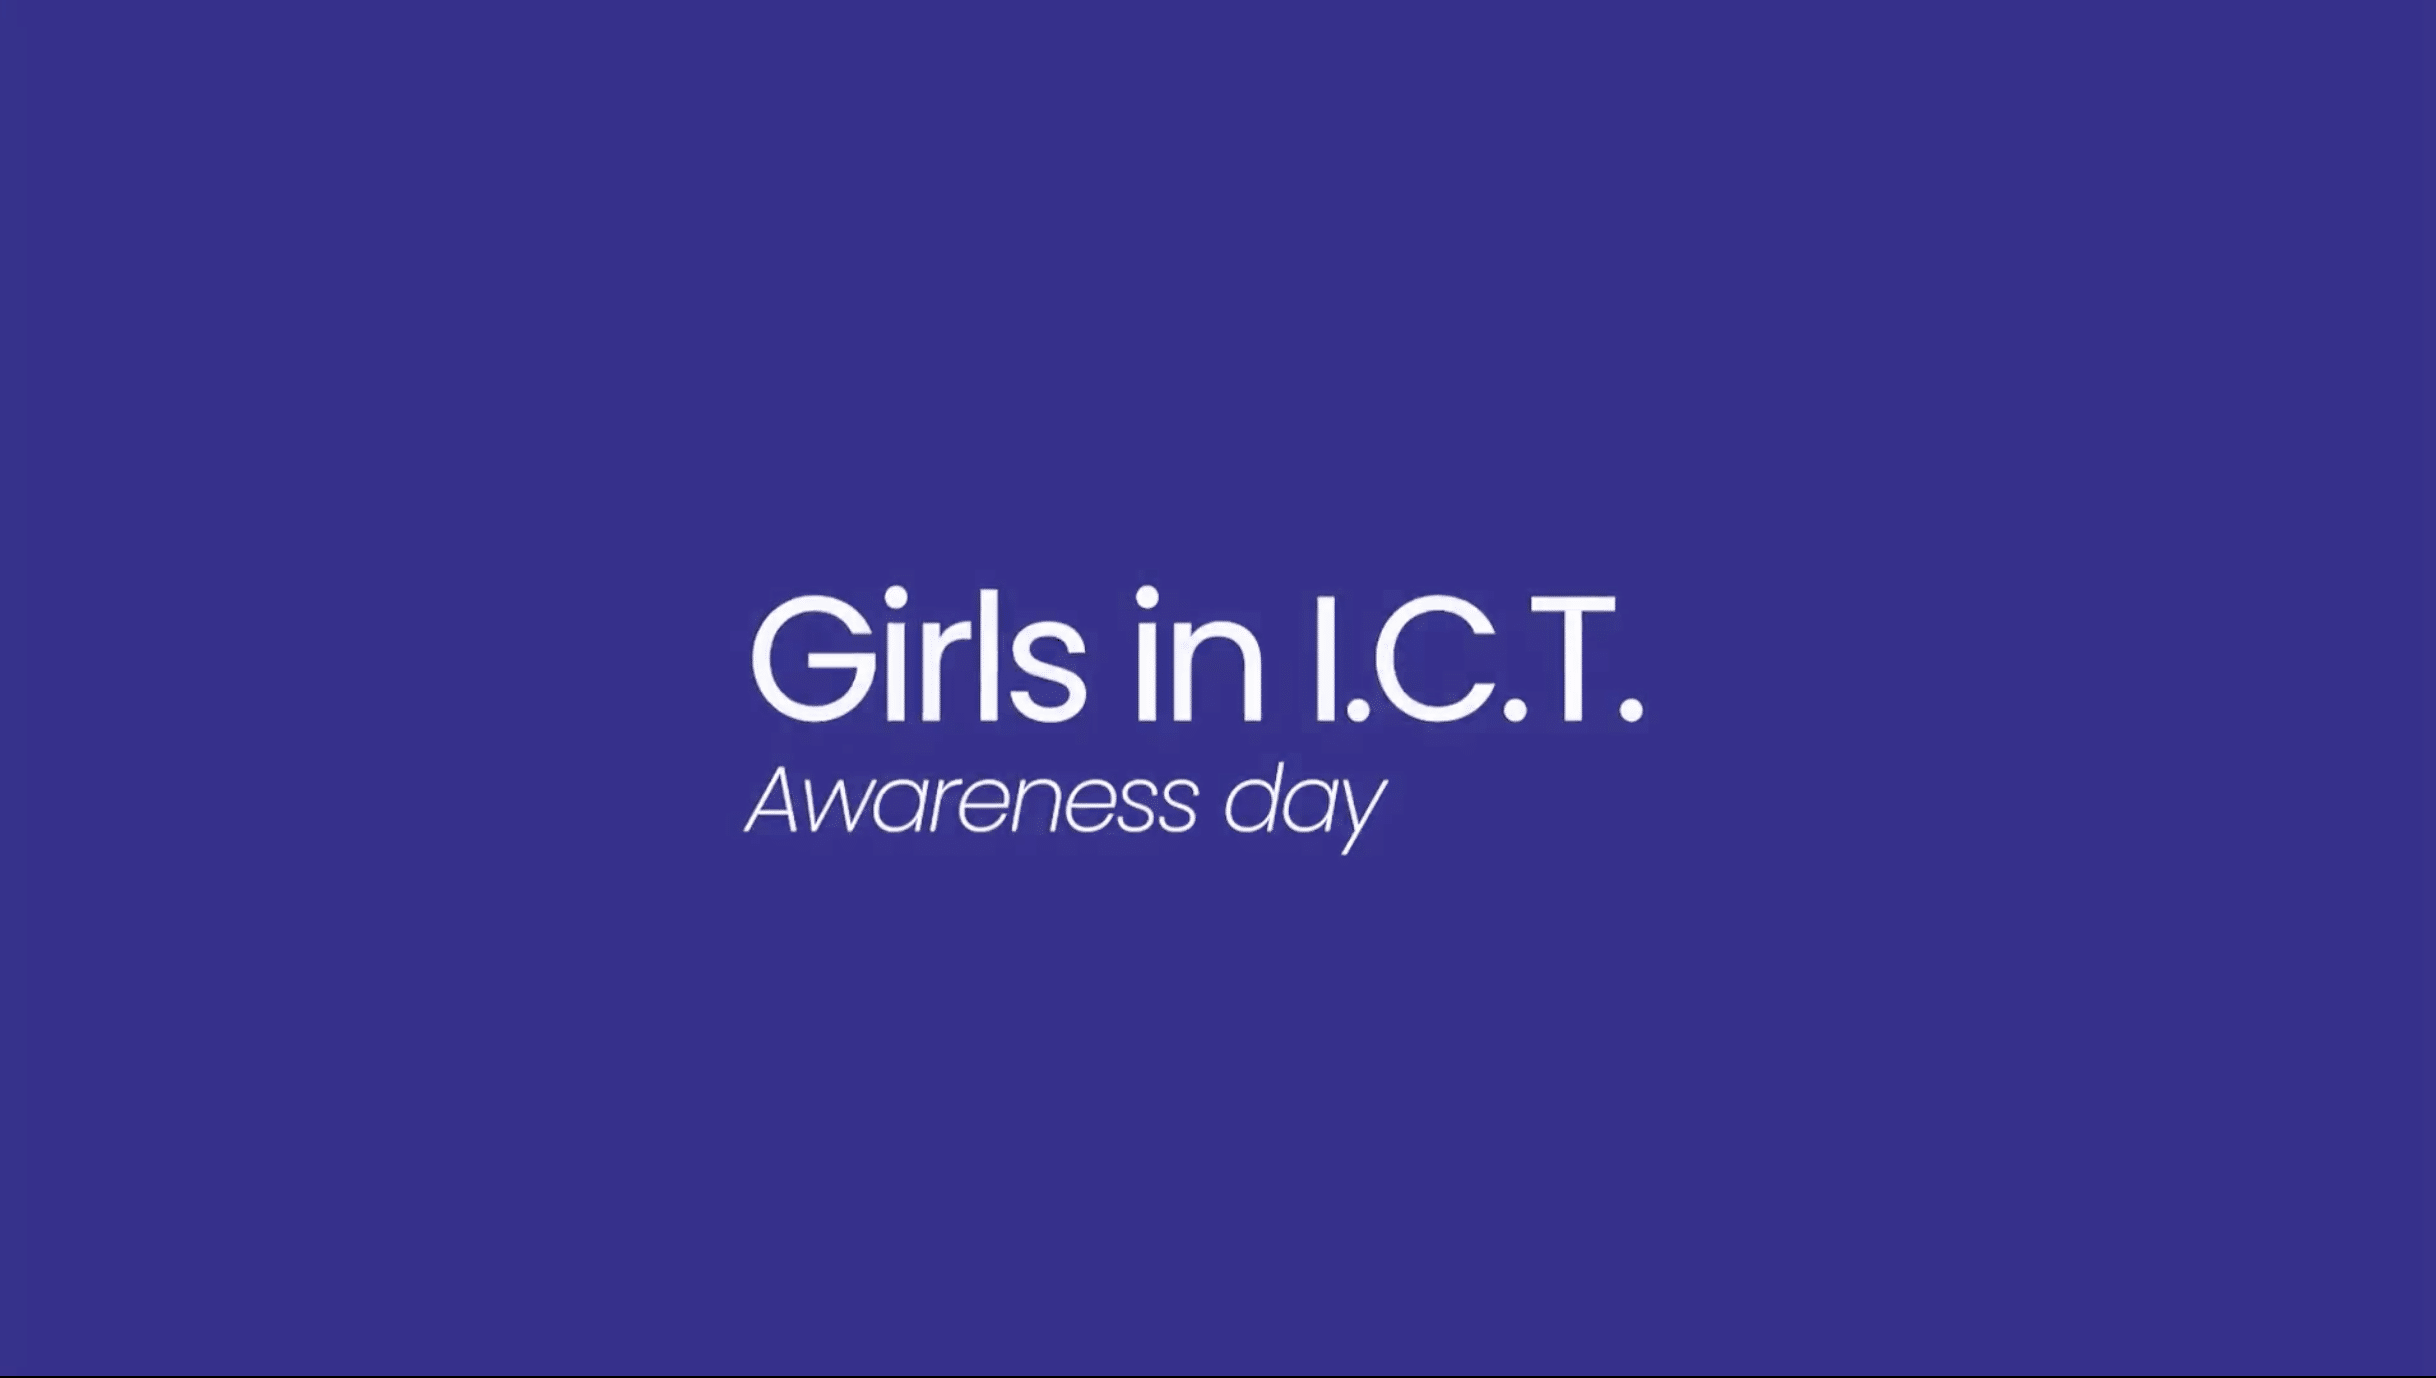 Girls in ICT awareness day